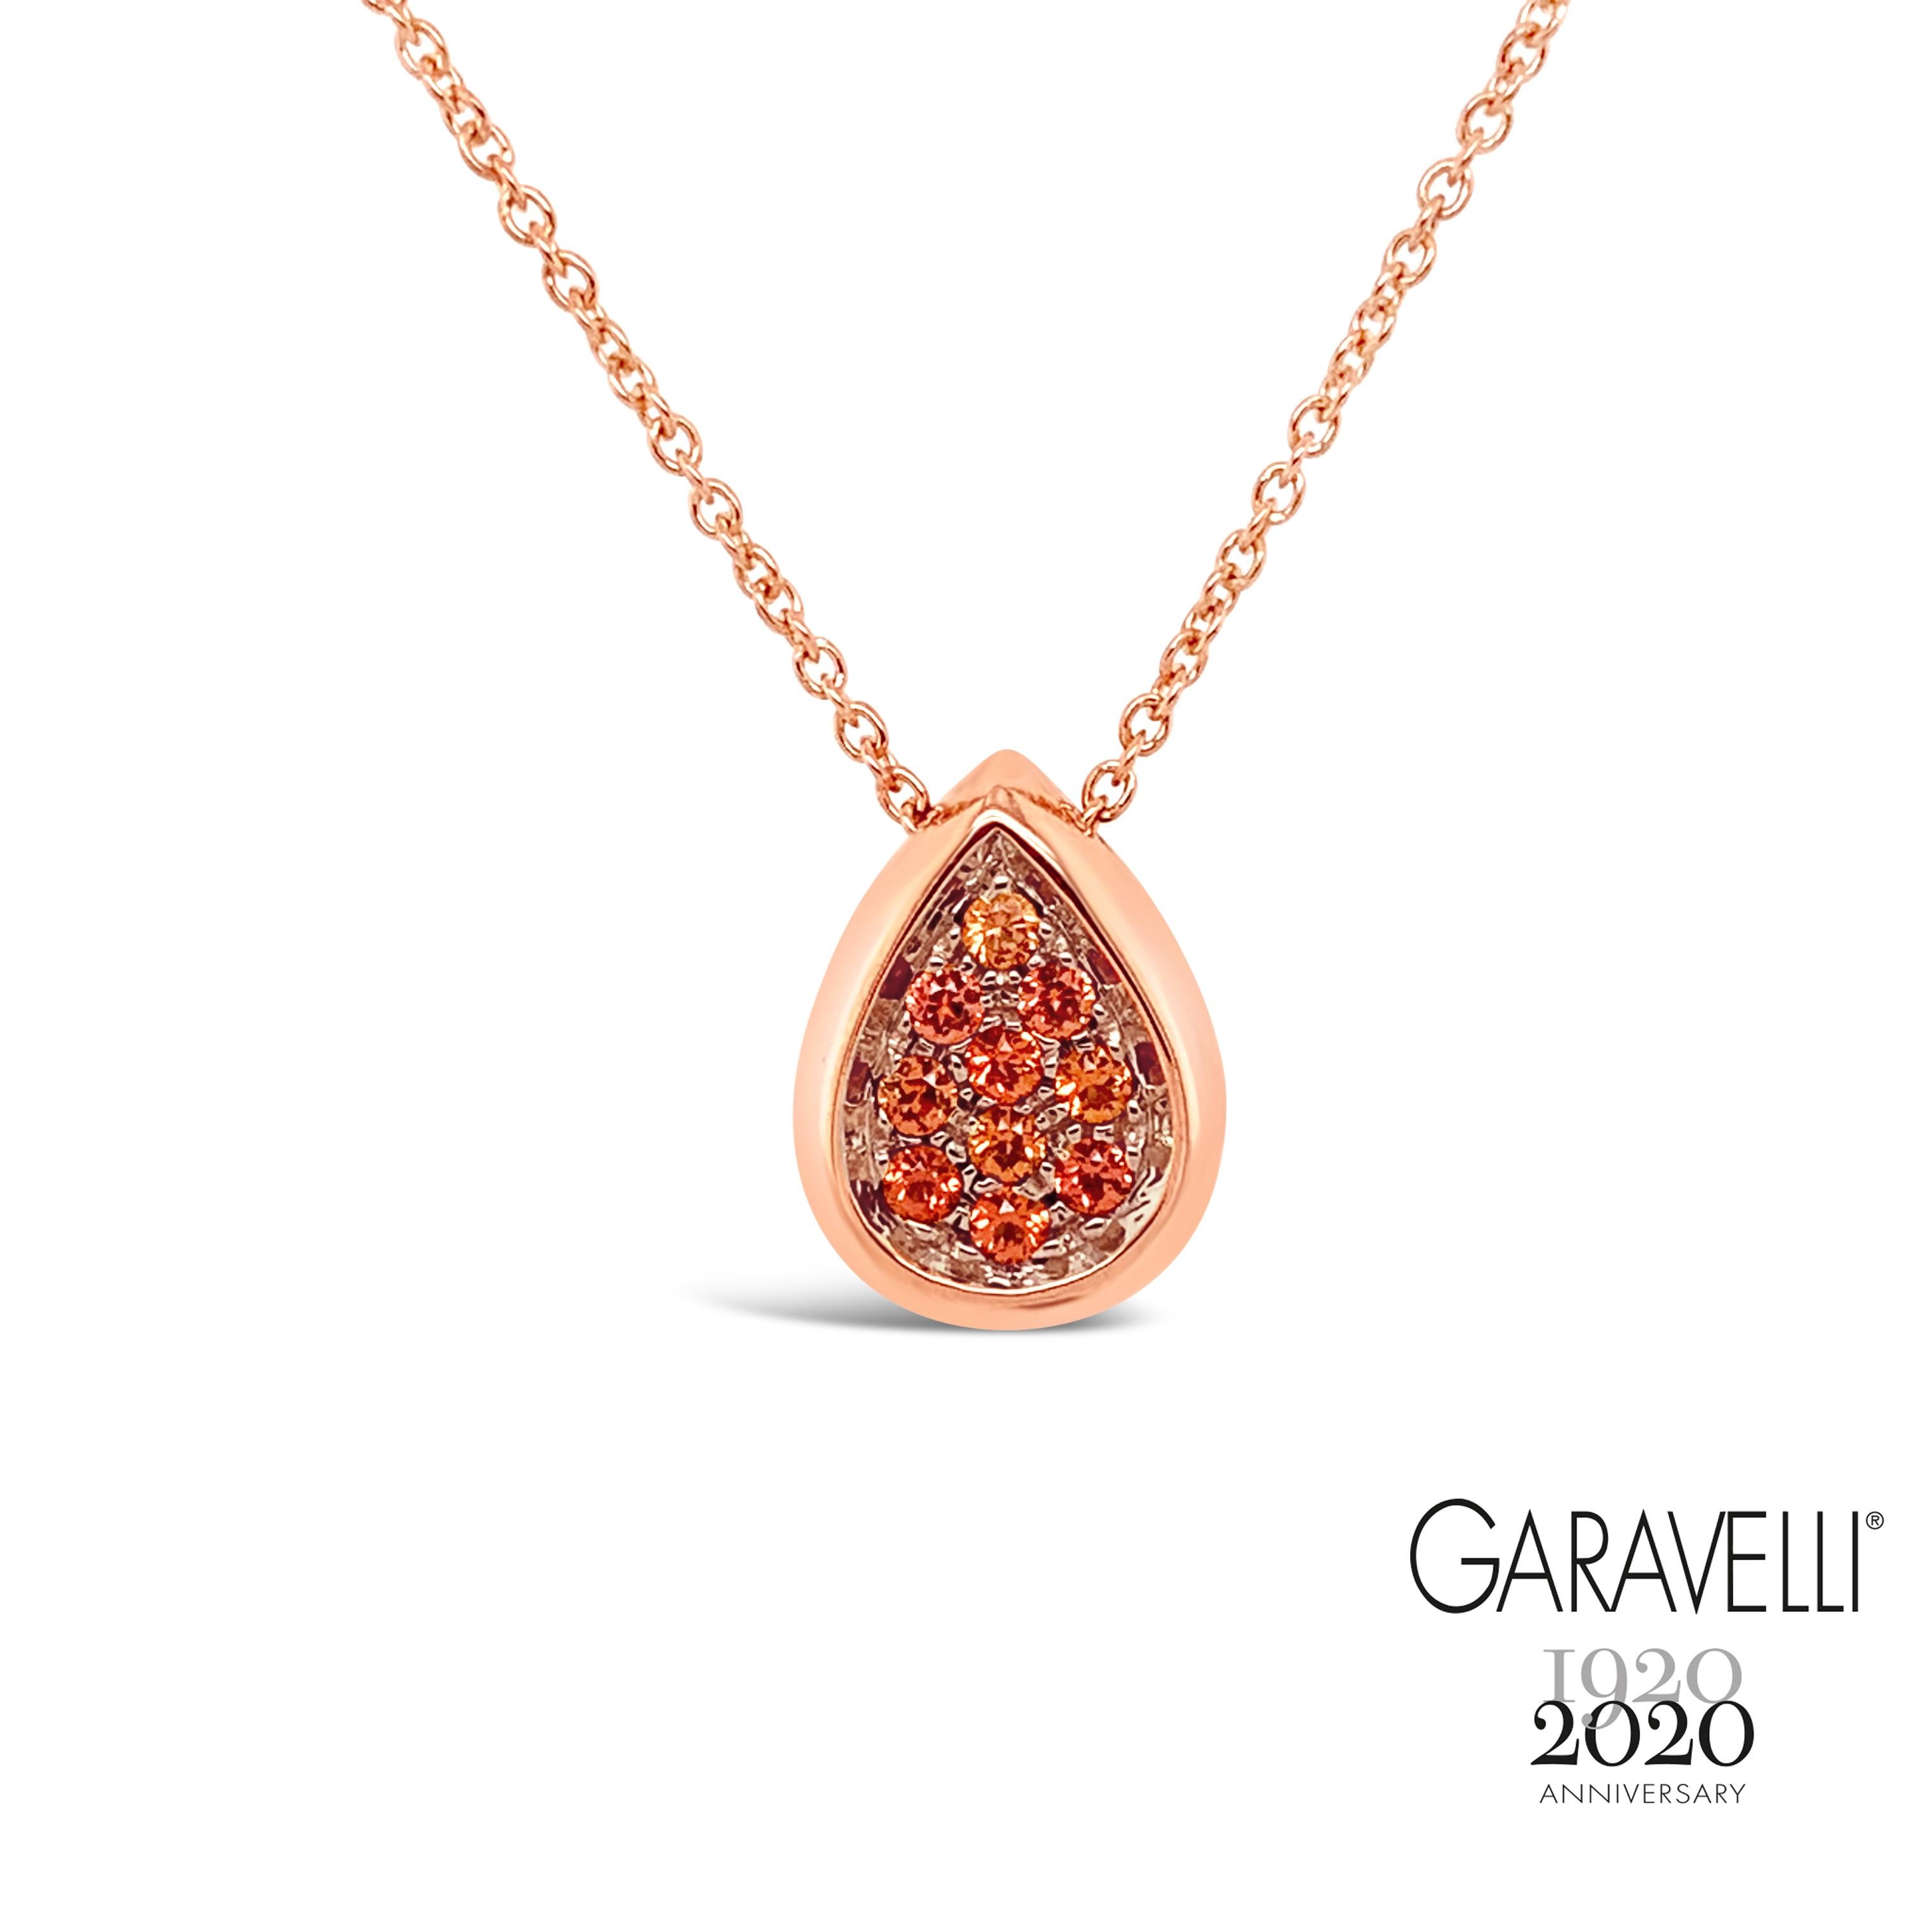 Garavelli DROP Pendant in 18kt Gold with White Diamonds
The new Giotto Collection DROP pendant .
Also at your choice: Rubies, Orange Sapphires, Peridot, Aquamarine   or Brown Diamonds
18kt gold Necklace included , lenght 19 inches with a loop at 17